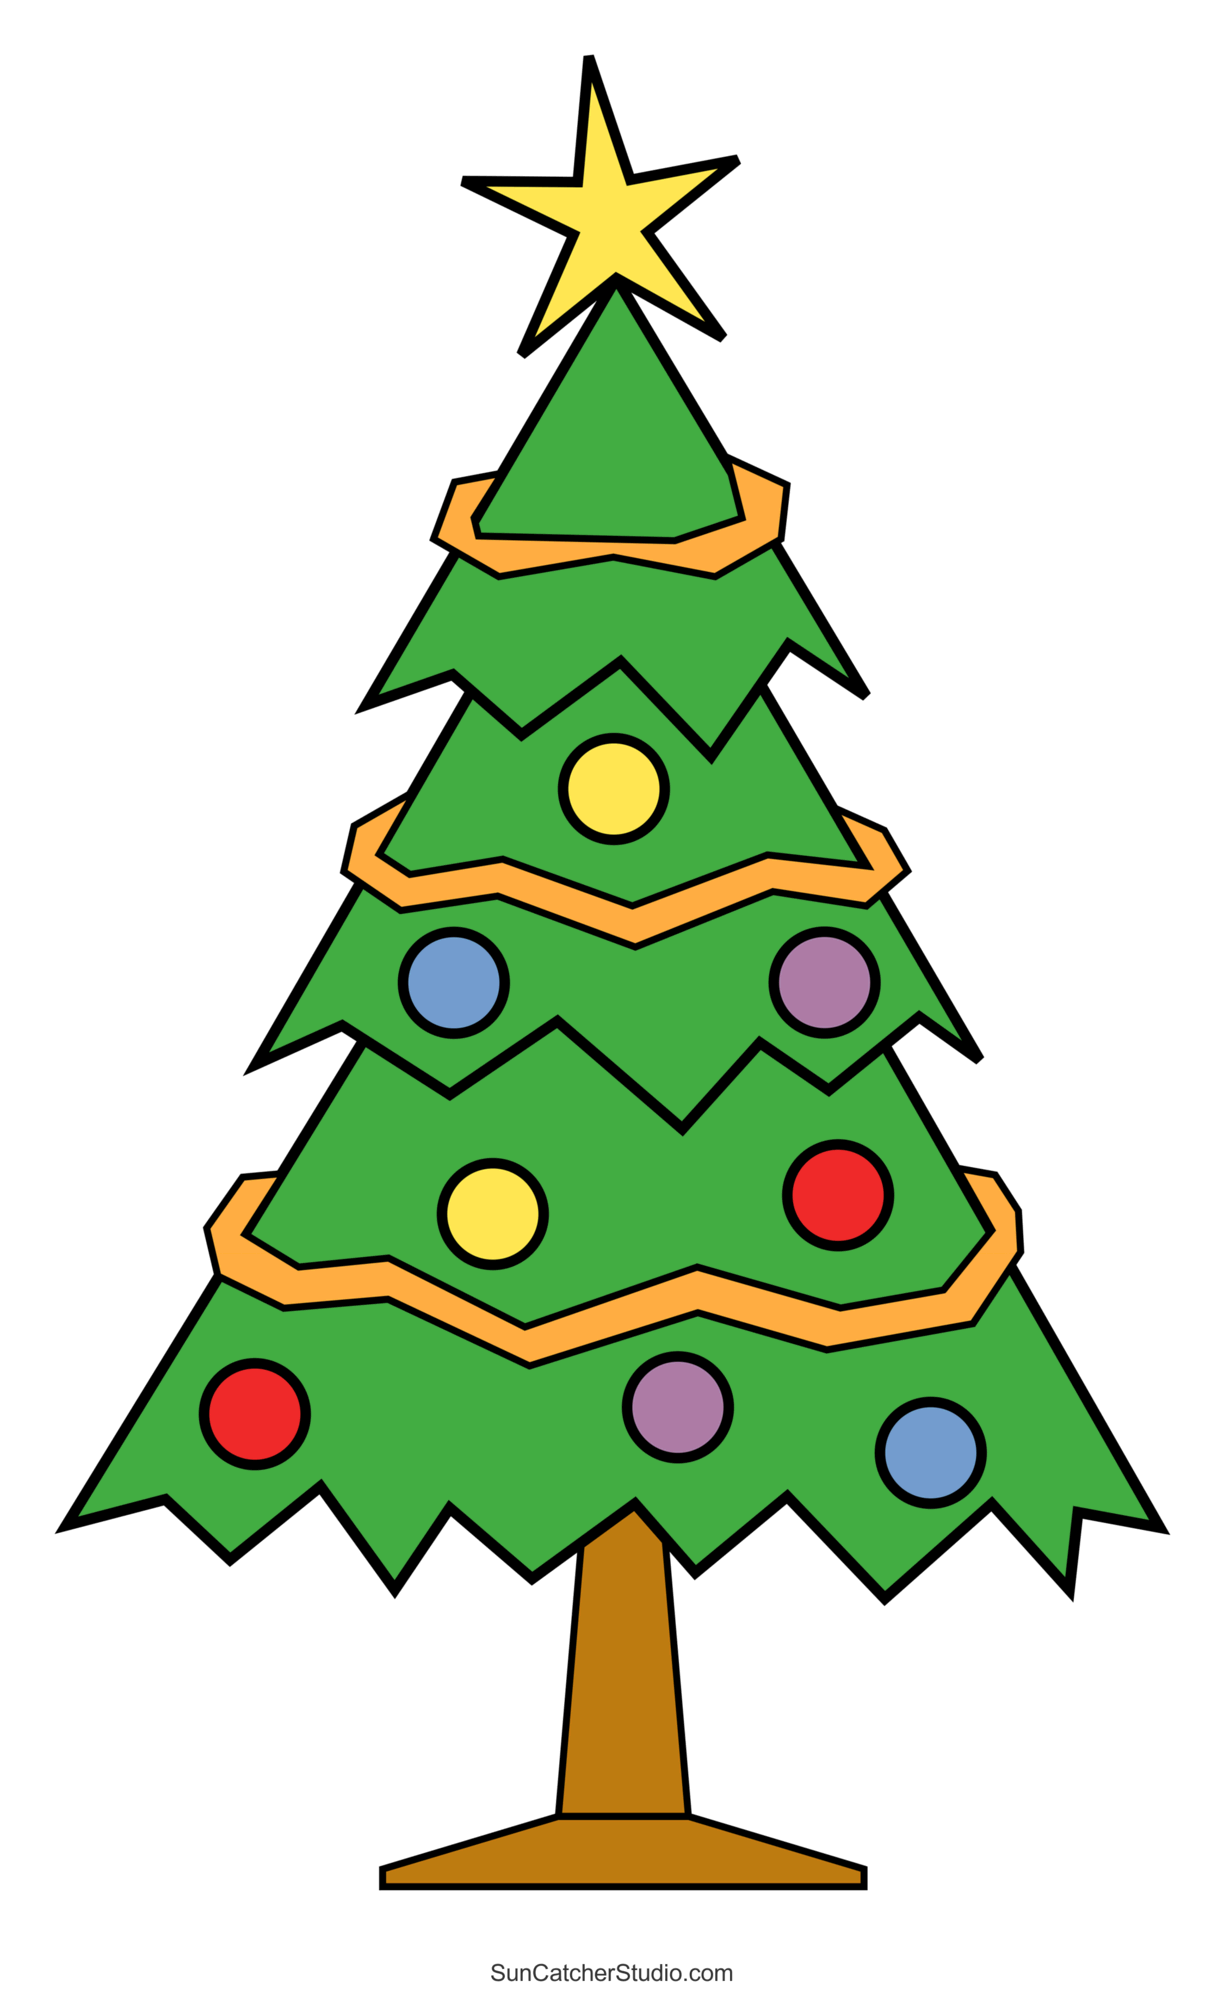 Christmas Tree Templates And Stencils Free Printable Patterns DIY Projects Patterns Monograms Designs Templates - Free Printable Christmas Clip Art